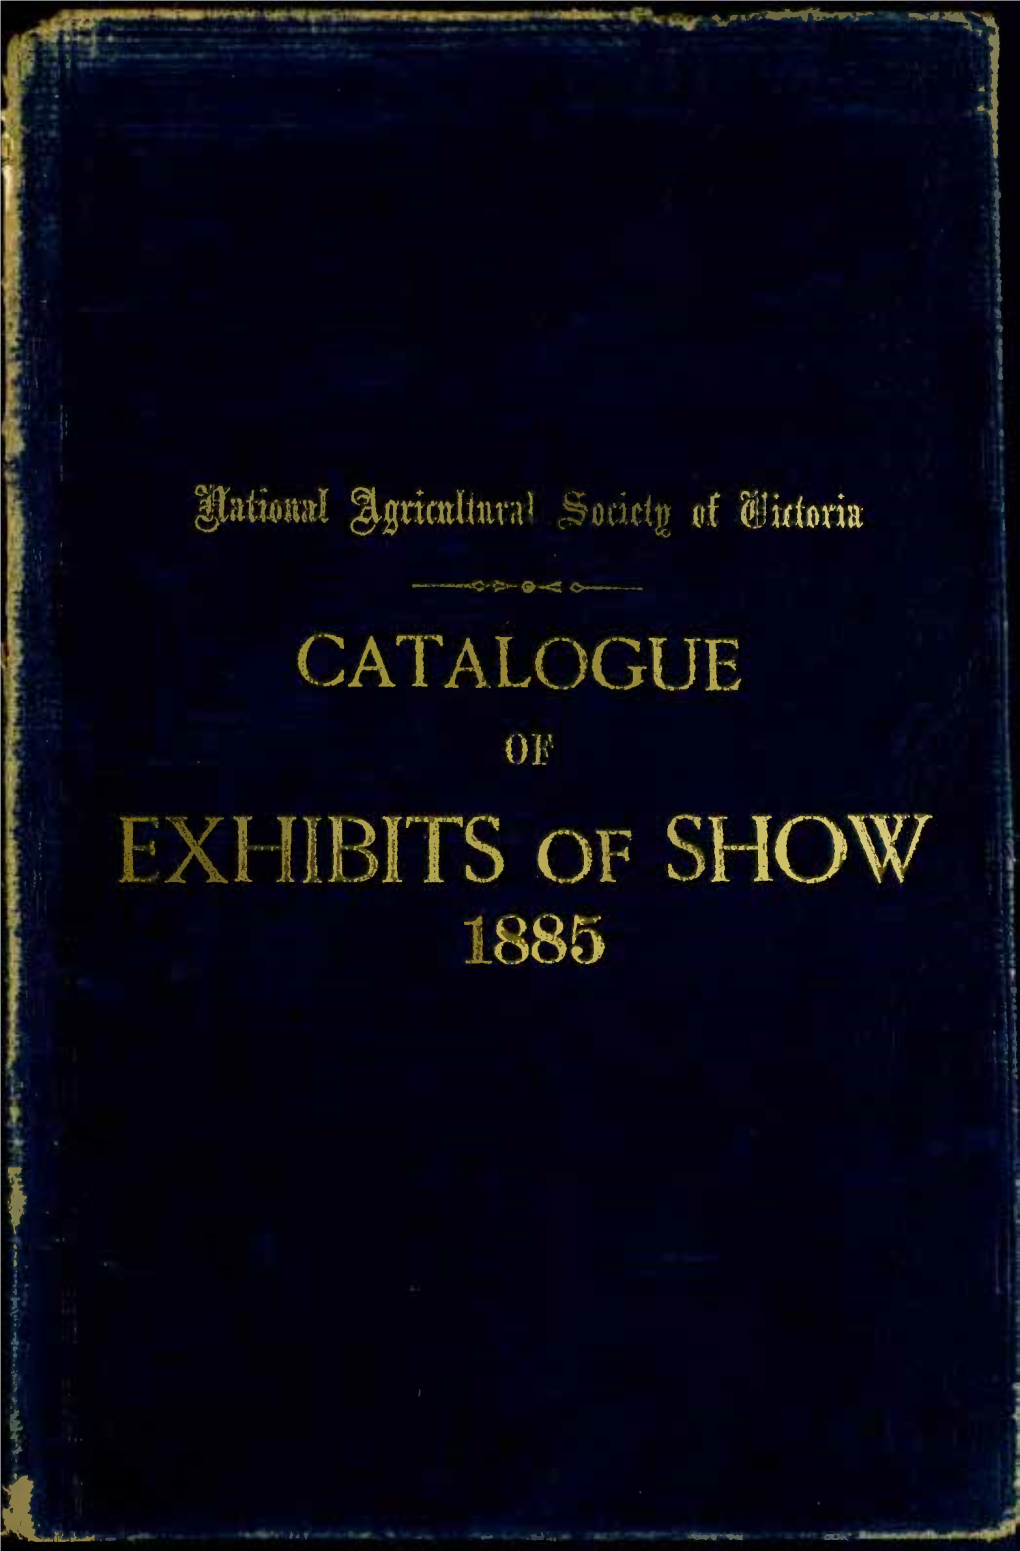 RMS Catalogue of Exhibits 1885